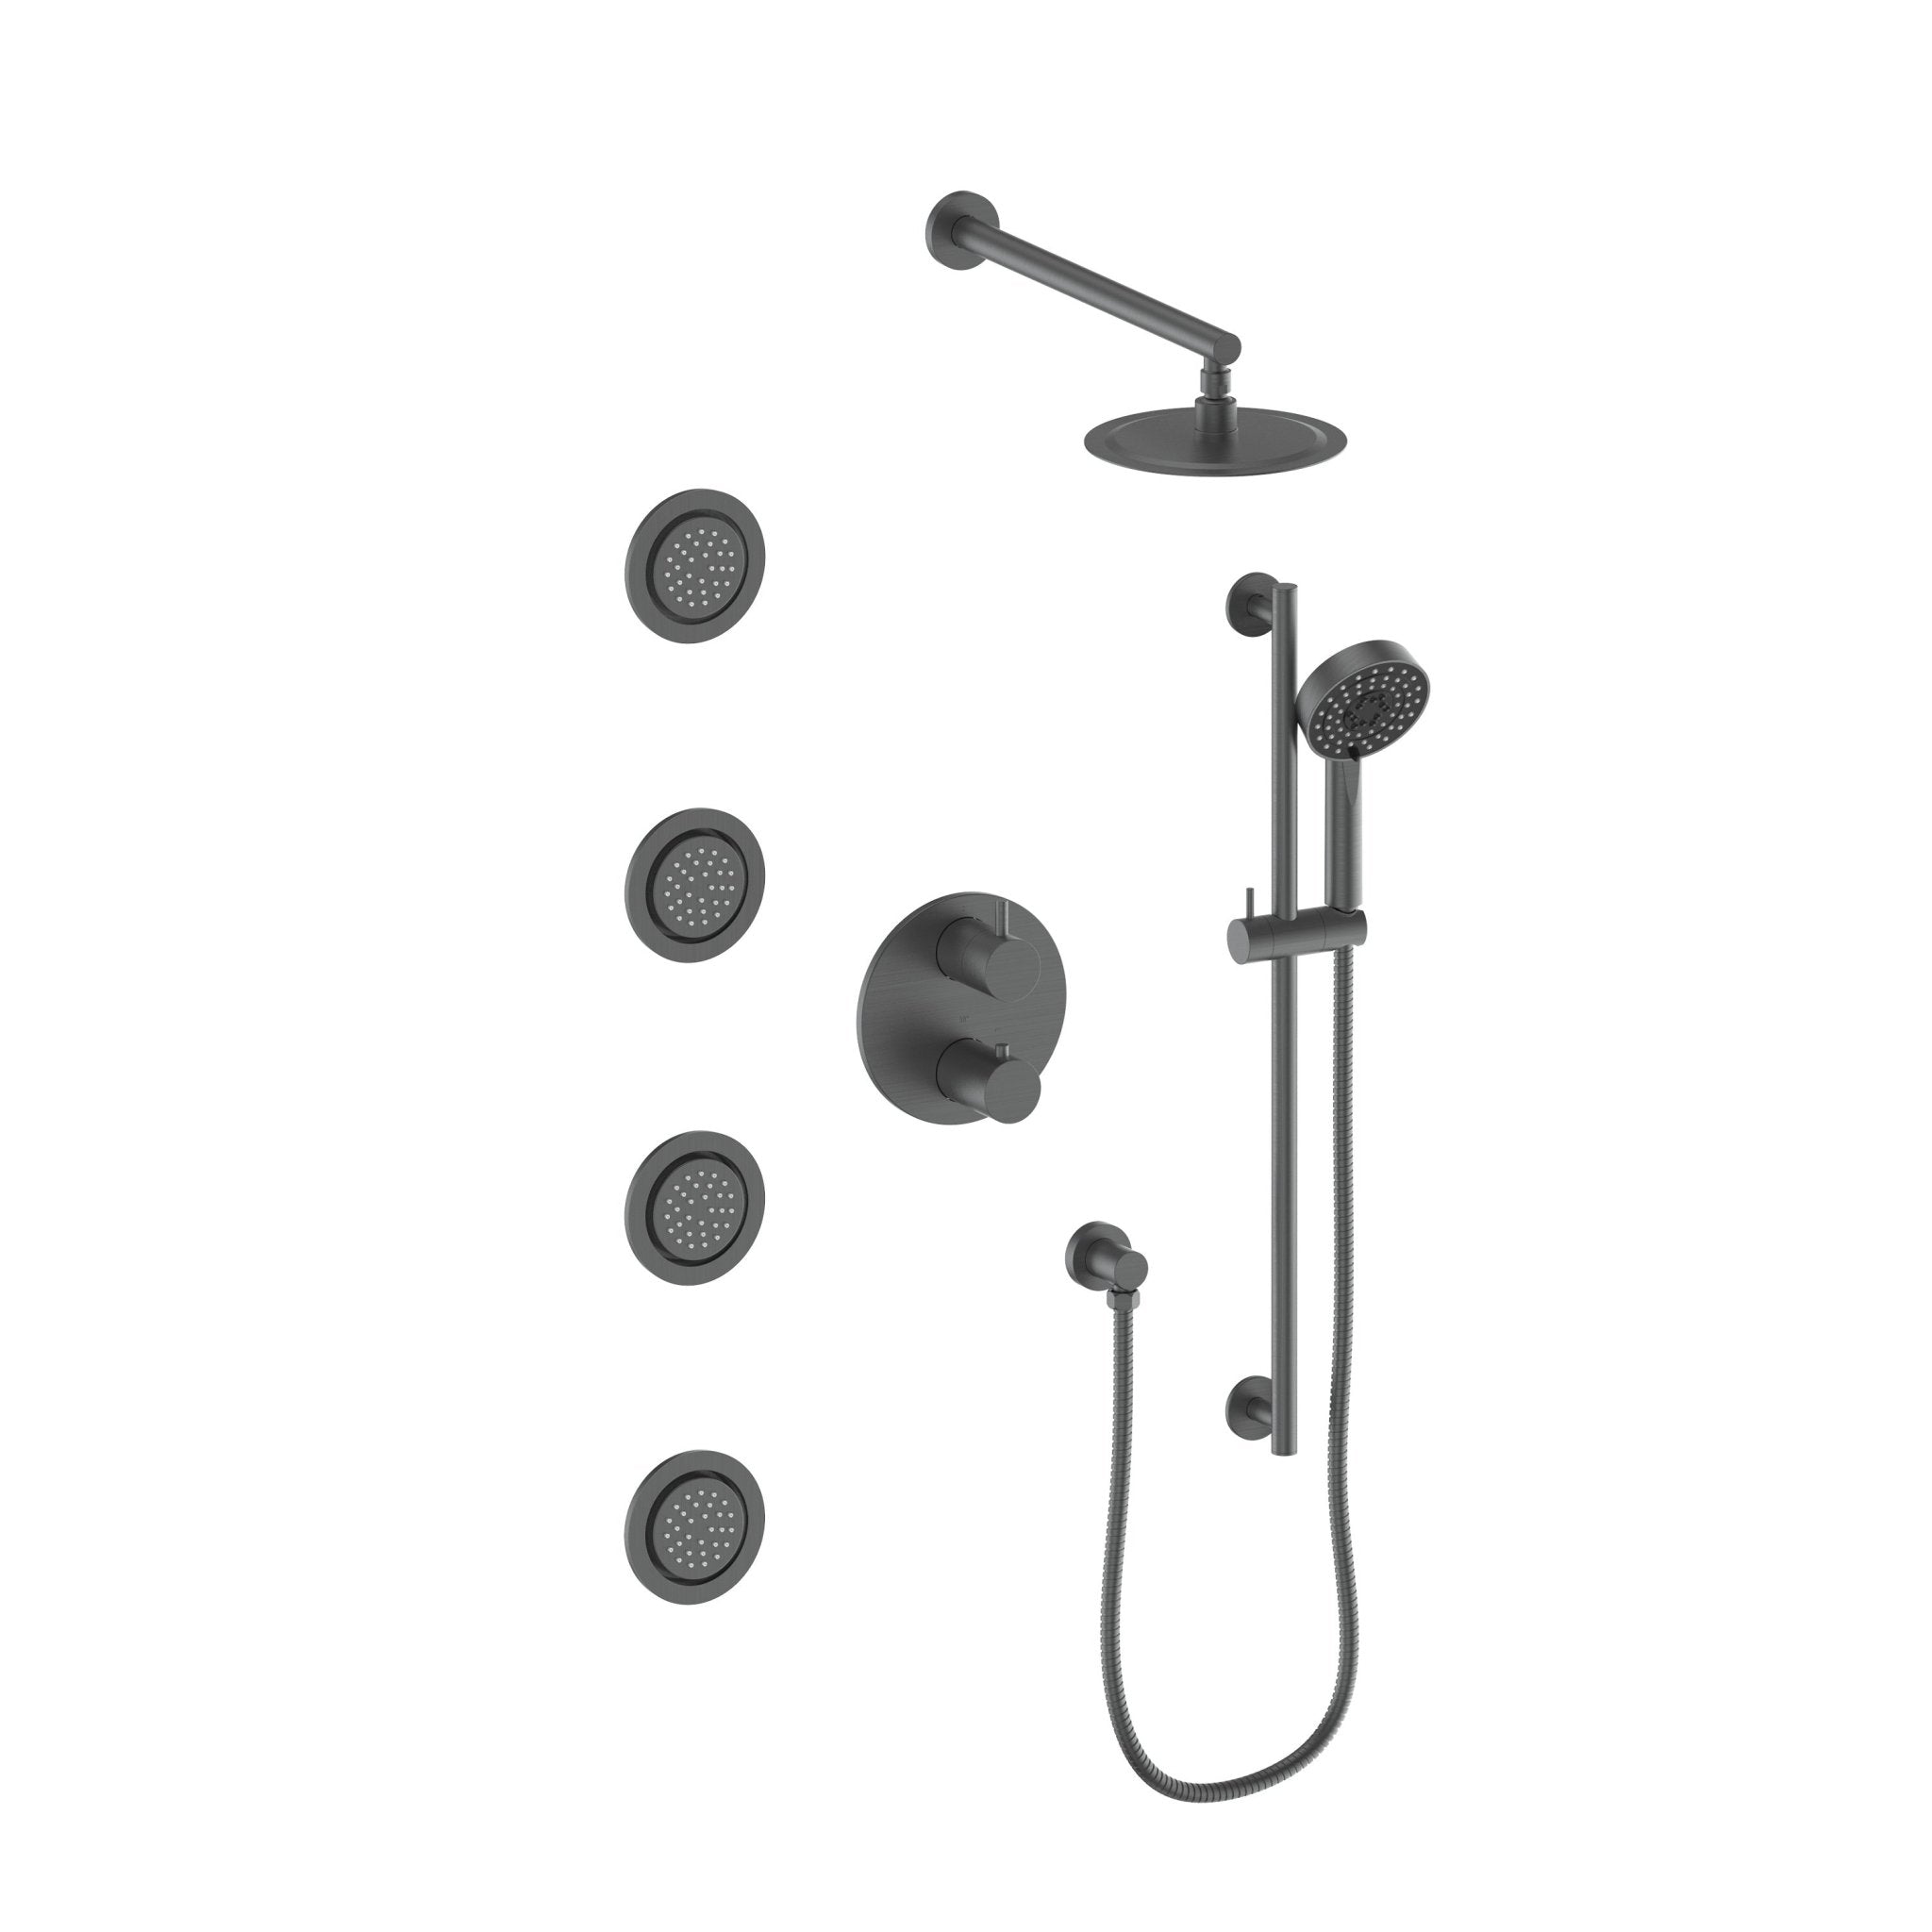 ZLINE Emerald Bay Thermostatic Shower System with Body Jets (EMBY-SHS-T3) in gun metal